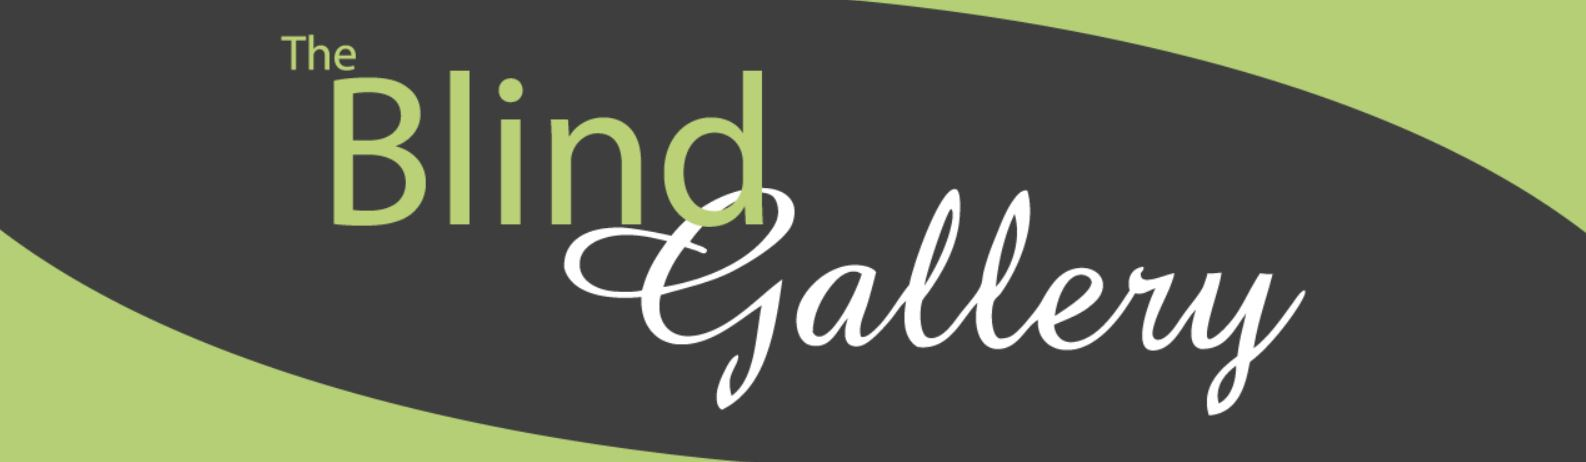 The Blind Gallery Logo